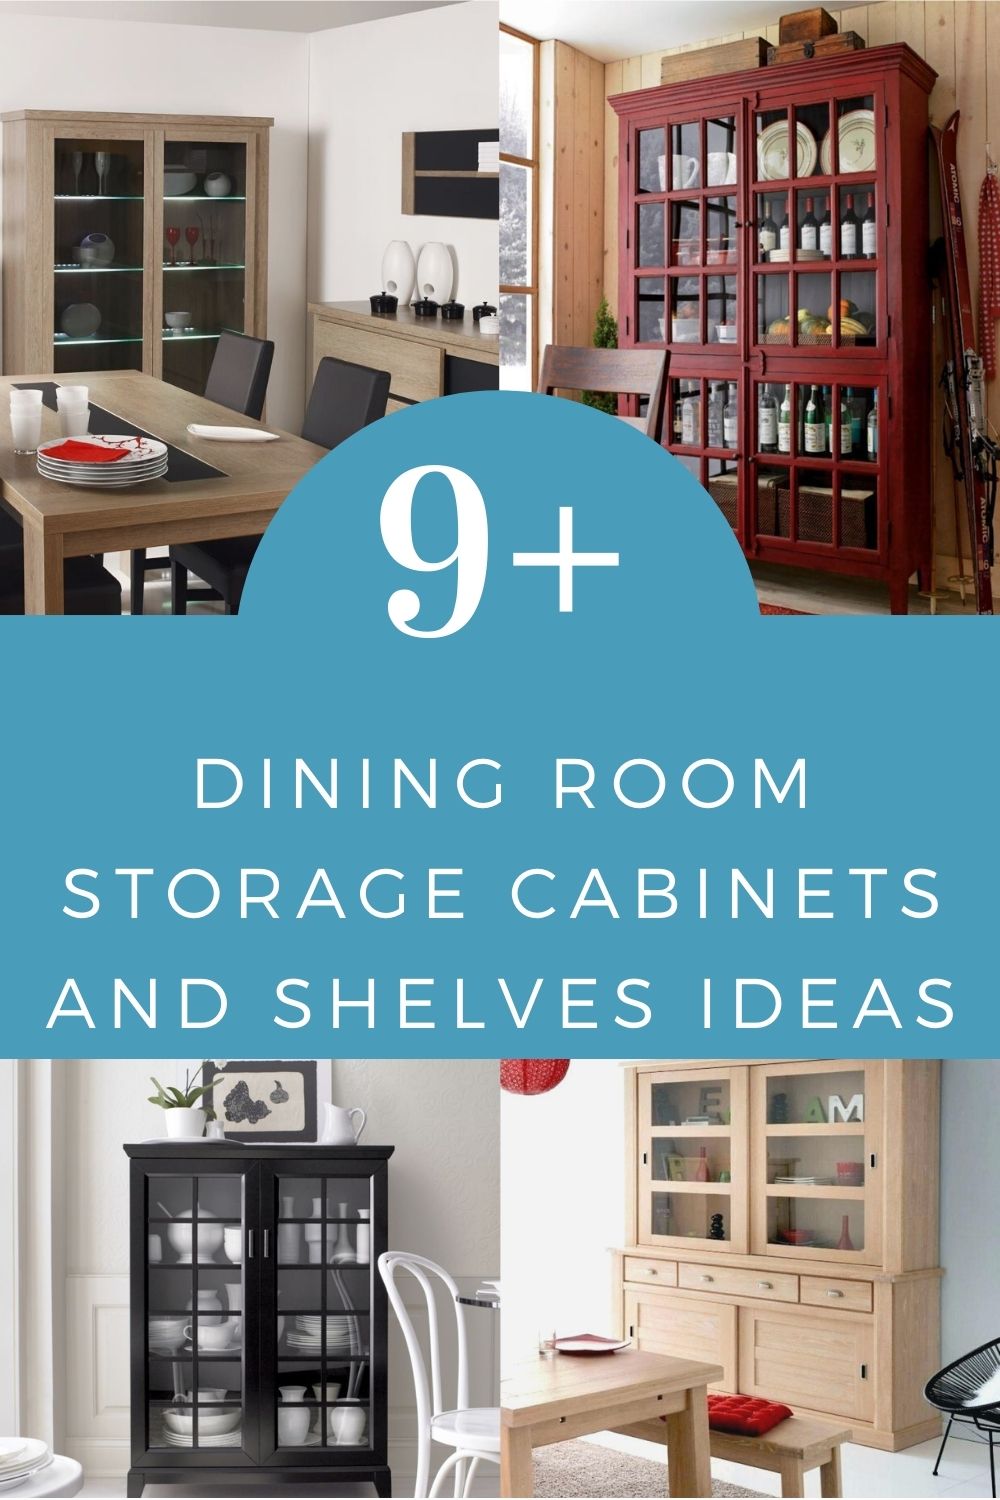 9+ Cool Dining Room Storage Cabinets and Shelves Ideas